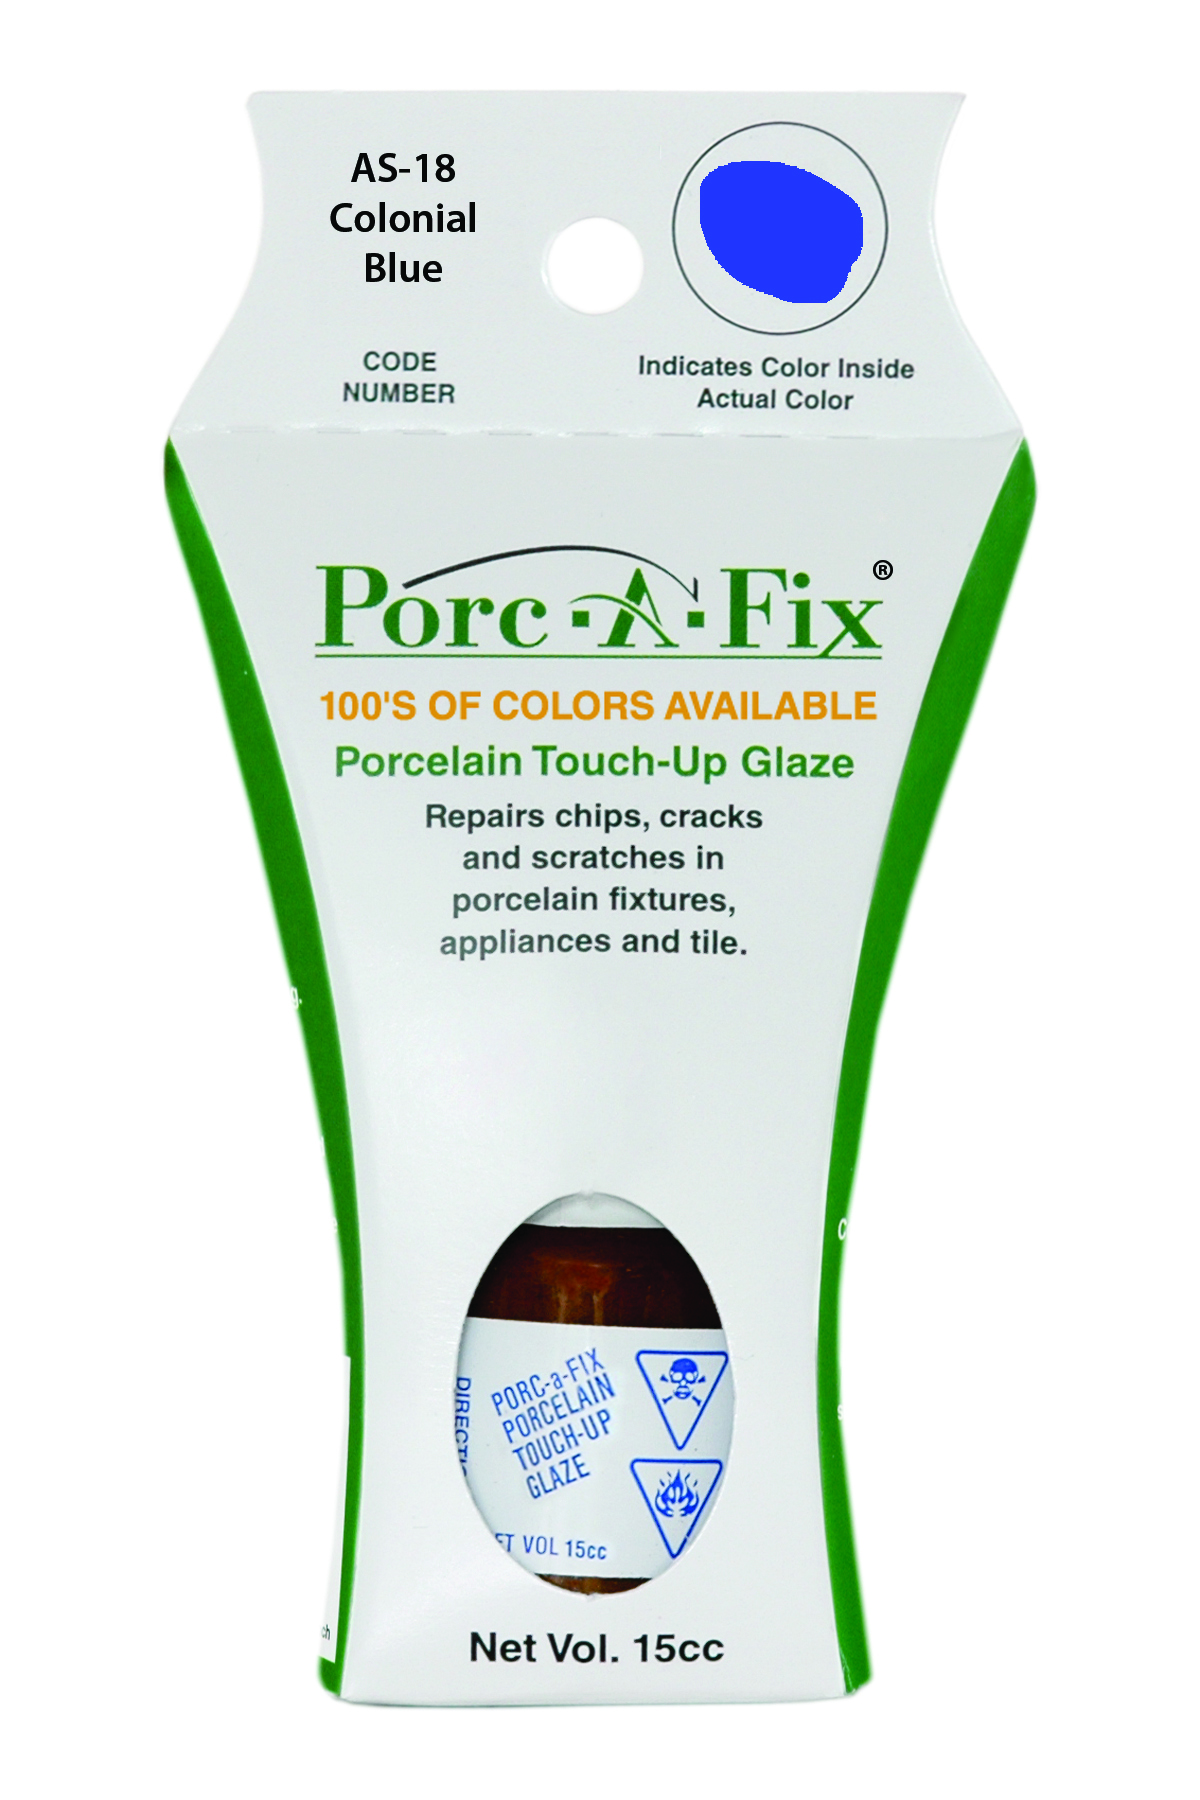 Fixture-Fix | AS-18 | Porc-A-Fix Touch-Up Glaze American Standard Colonial Blue - Compatible with American Standard 070900-1490A Touch Up Paint Kit - COLONIAL BLUE